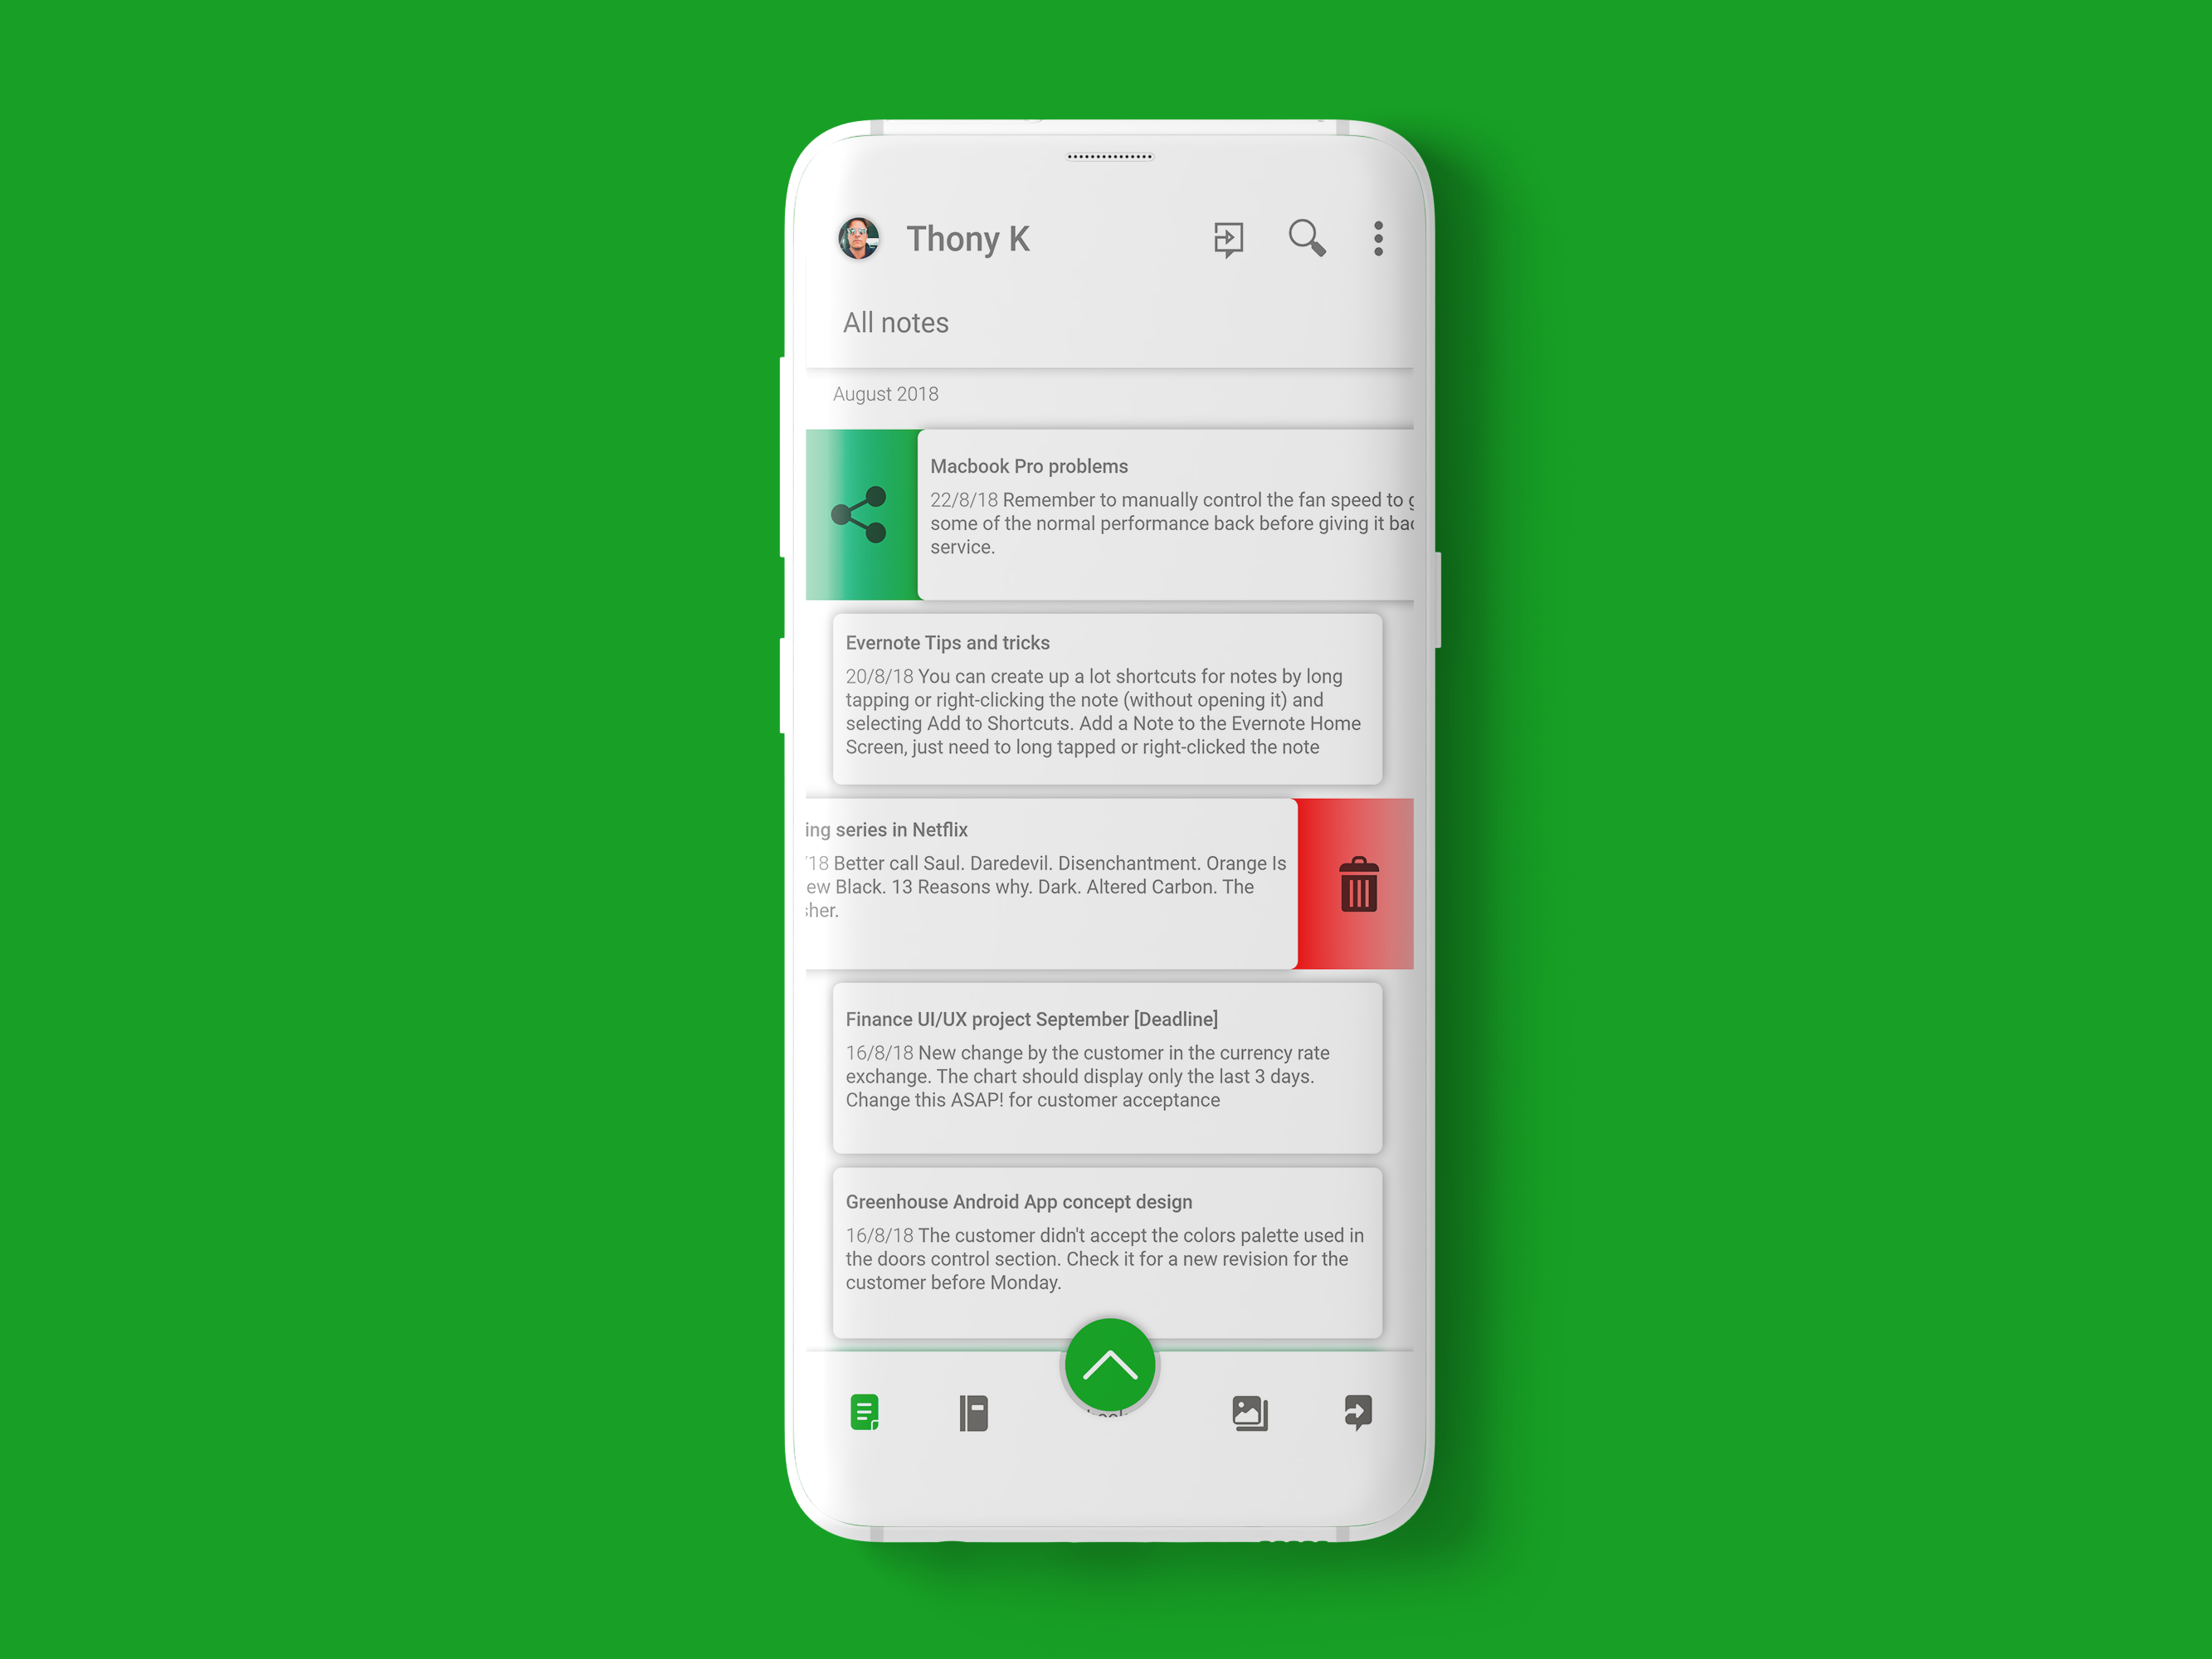 about evernote app